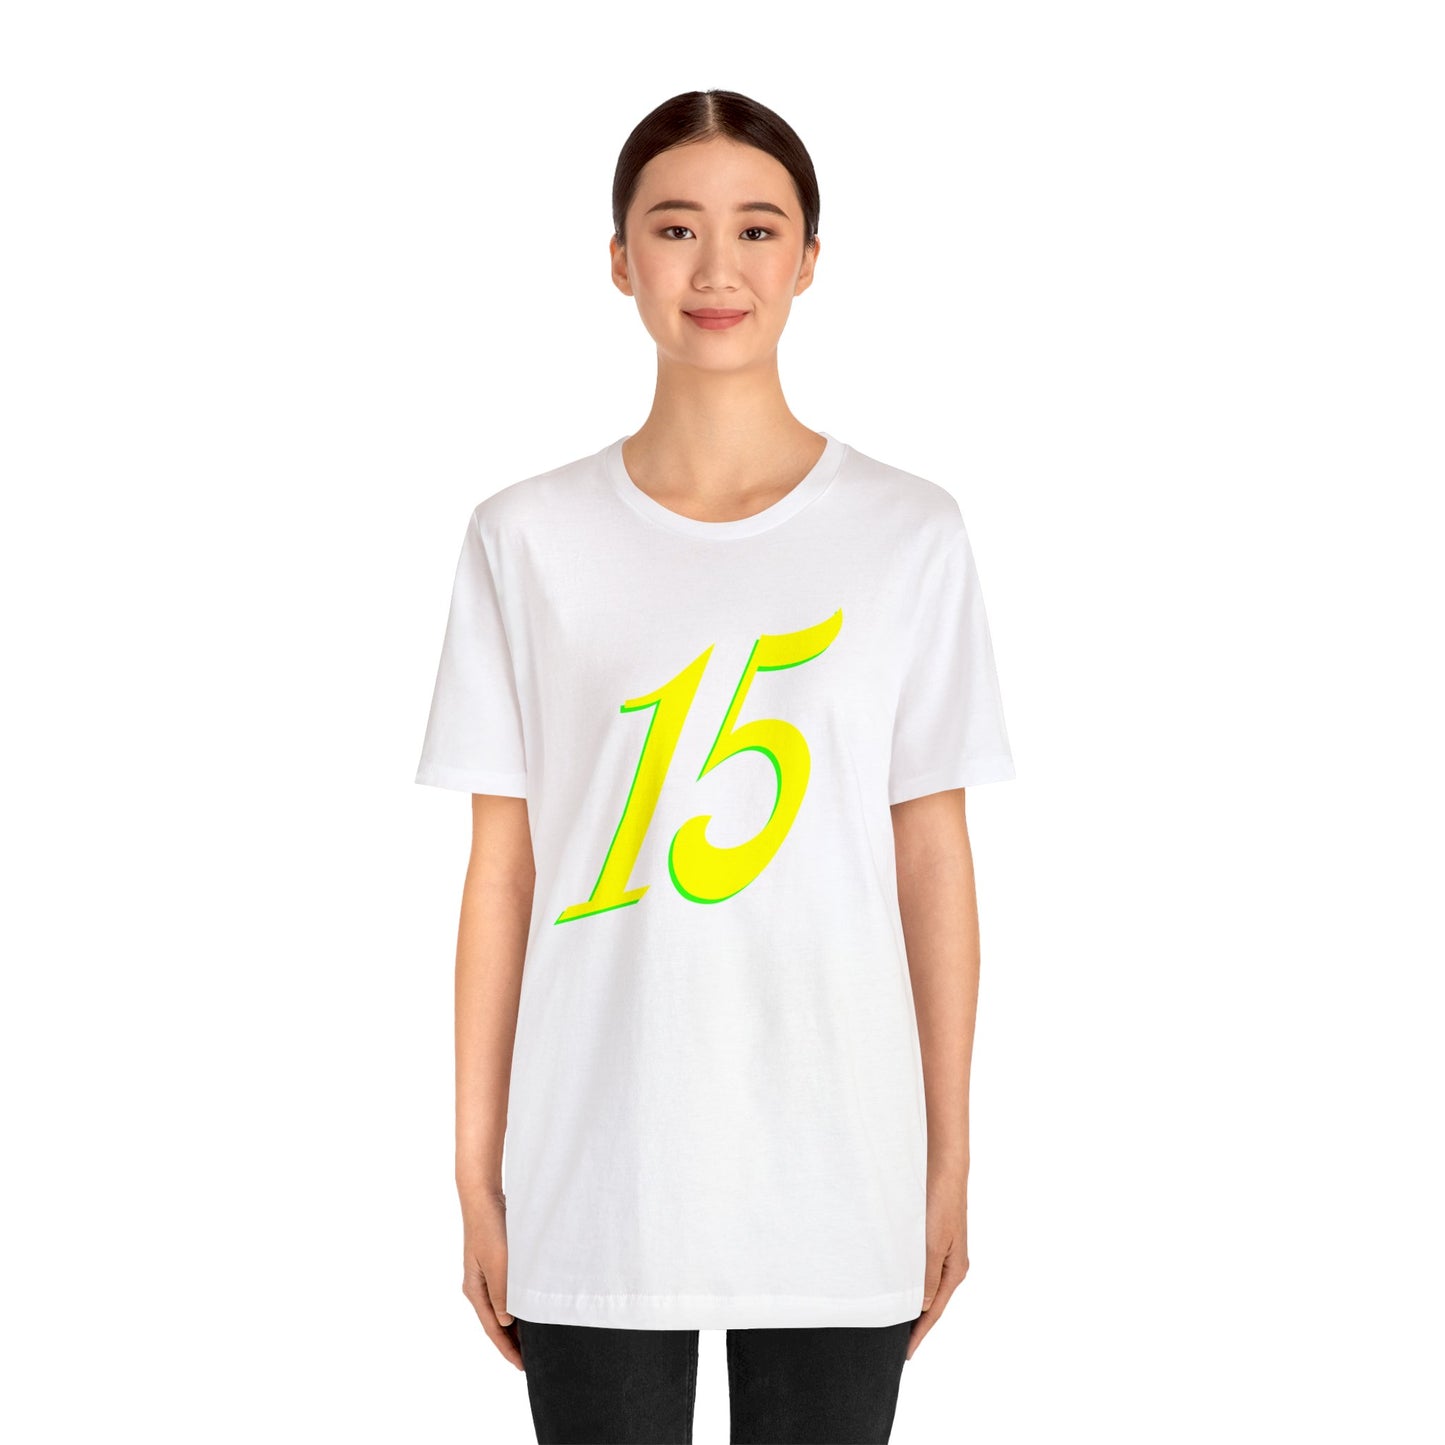 Number 15 Design - Soft Cotton Tee for birthdays and celebrations, Gift for friends and family, Multiple Options by clothezy.com in Asphalt Size Medium - Buy Now